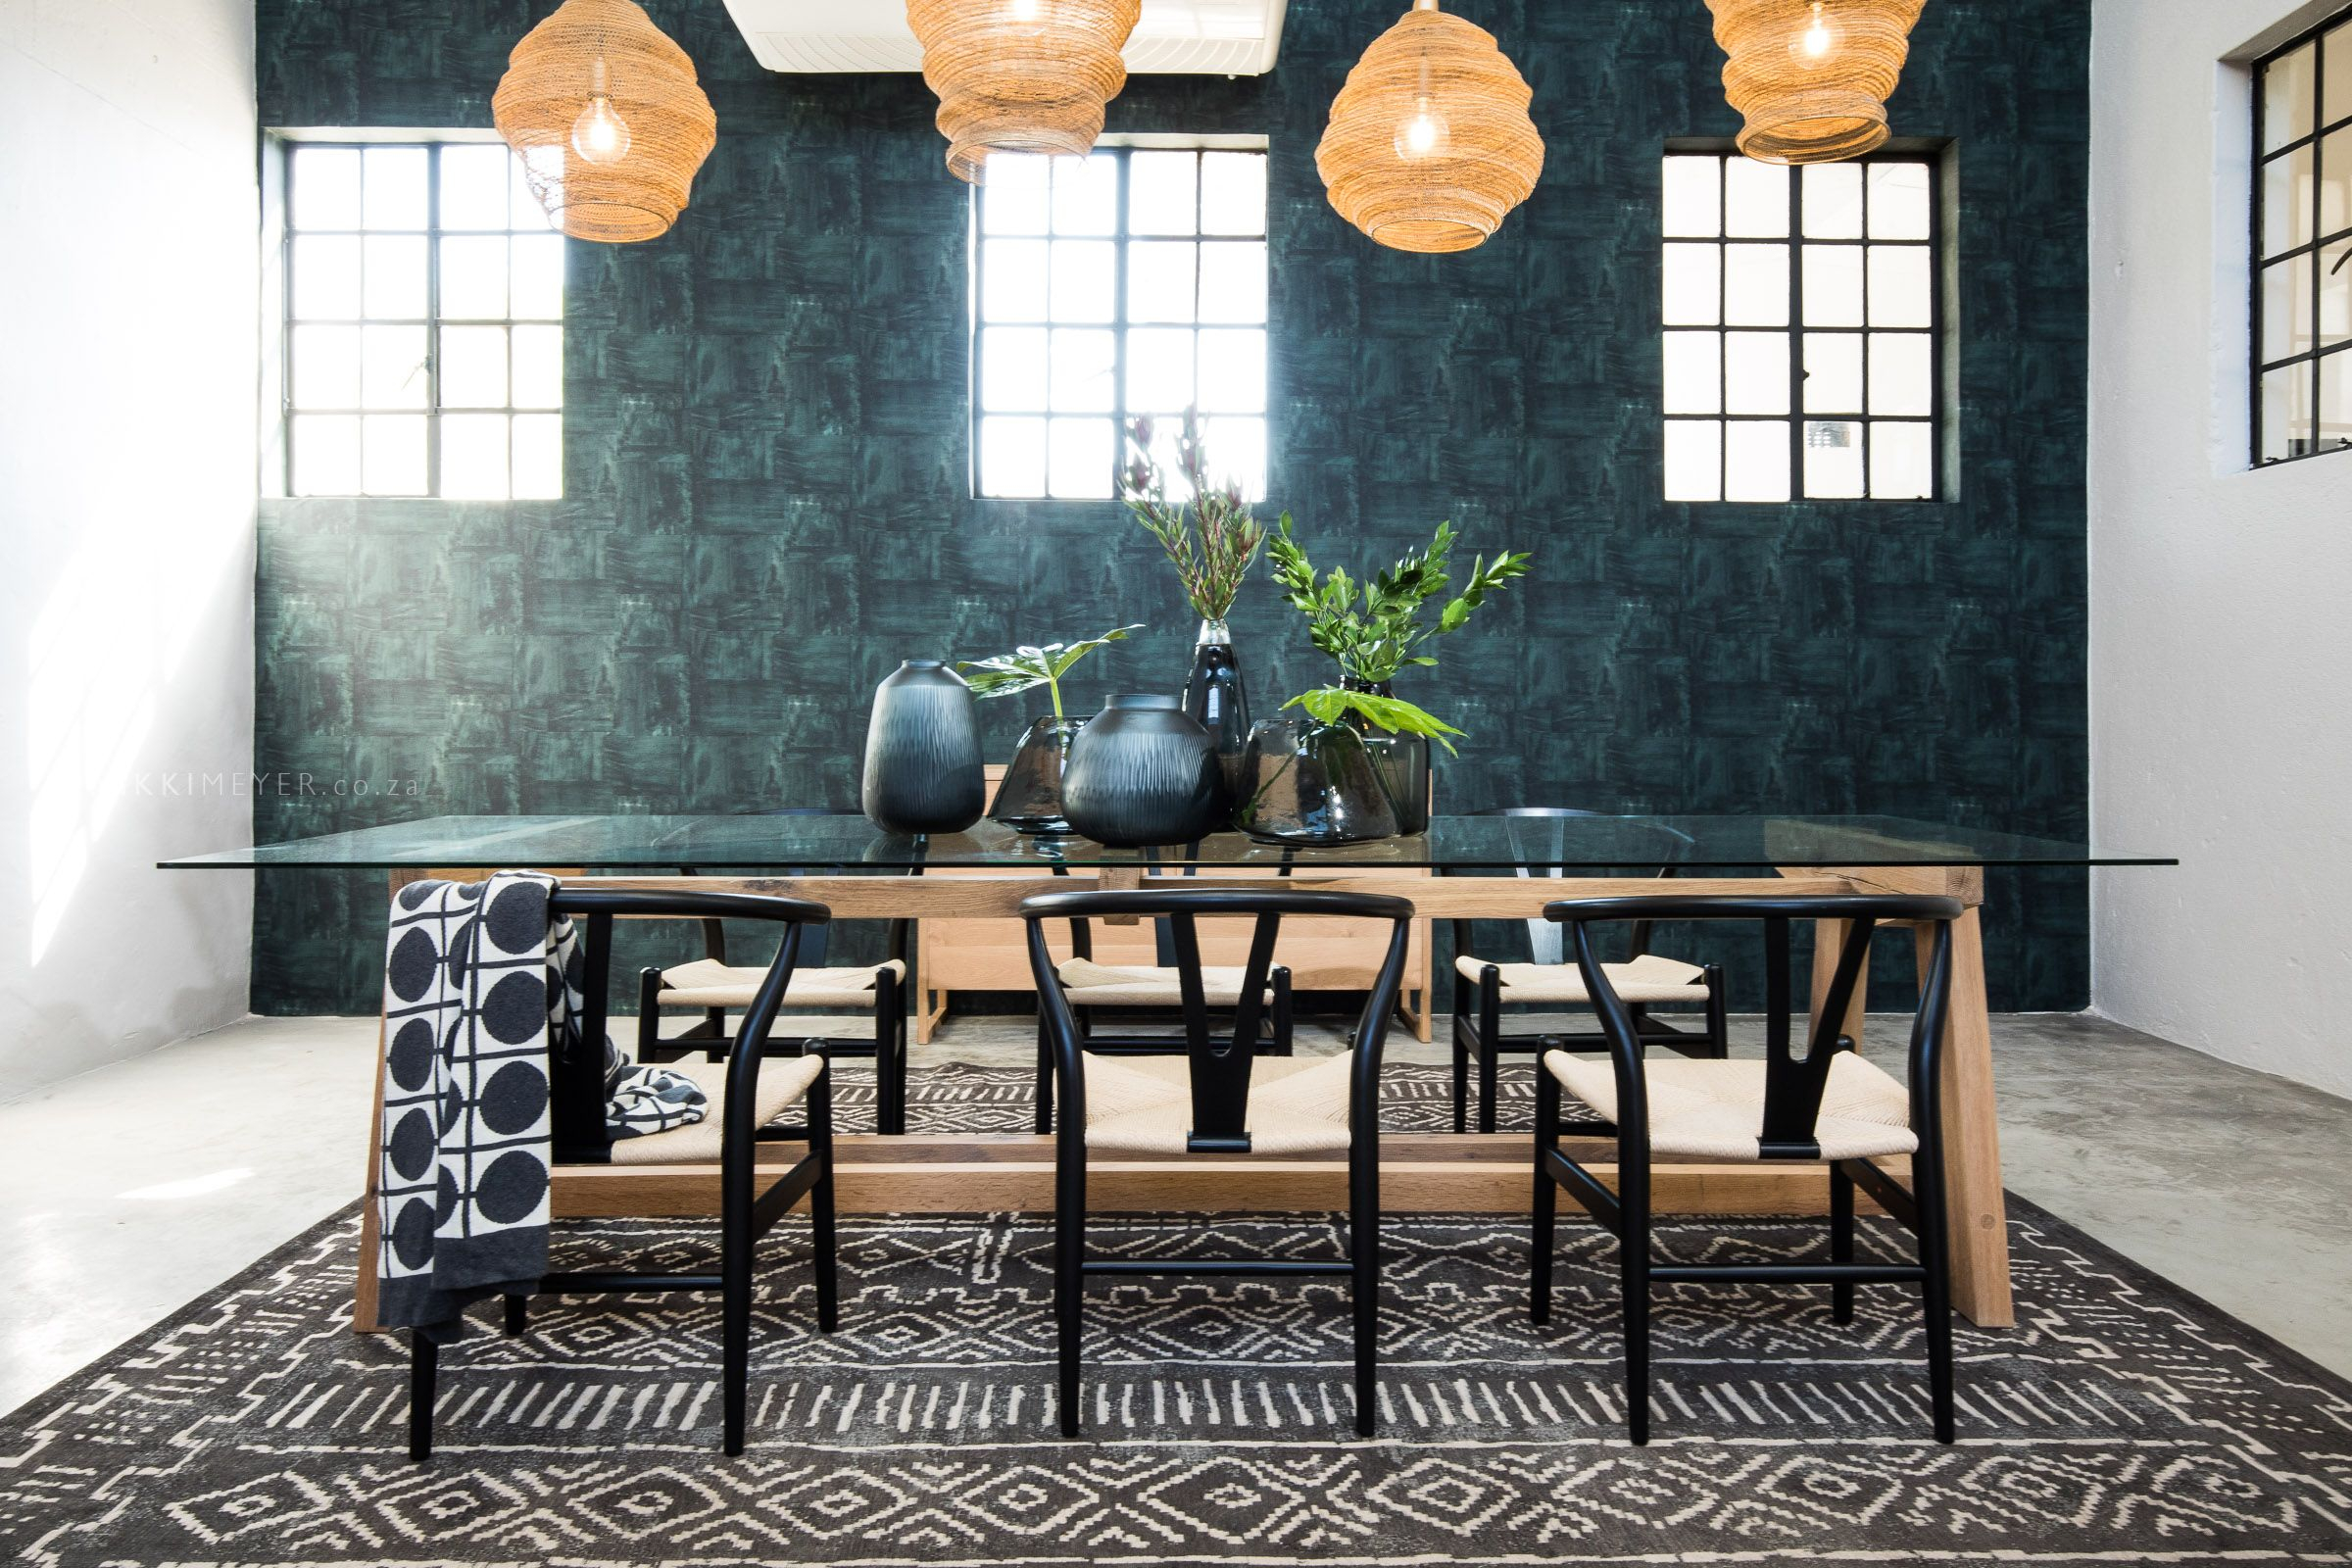 Spice Up Your Dining Room With Jungle Simplicity Incanda pertaining to dimensions 2400 X 1600